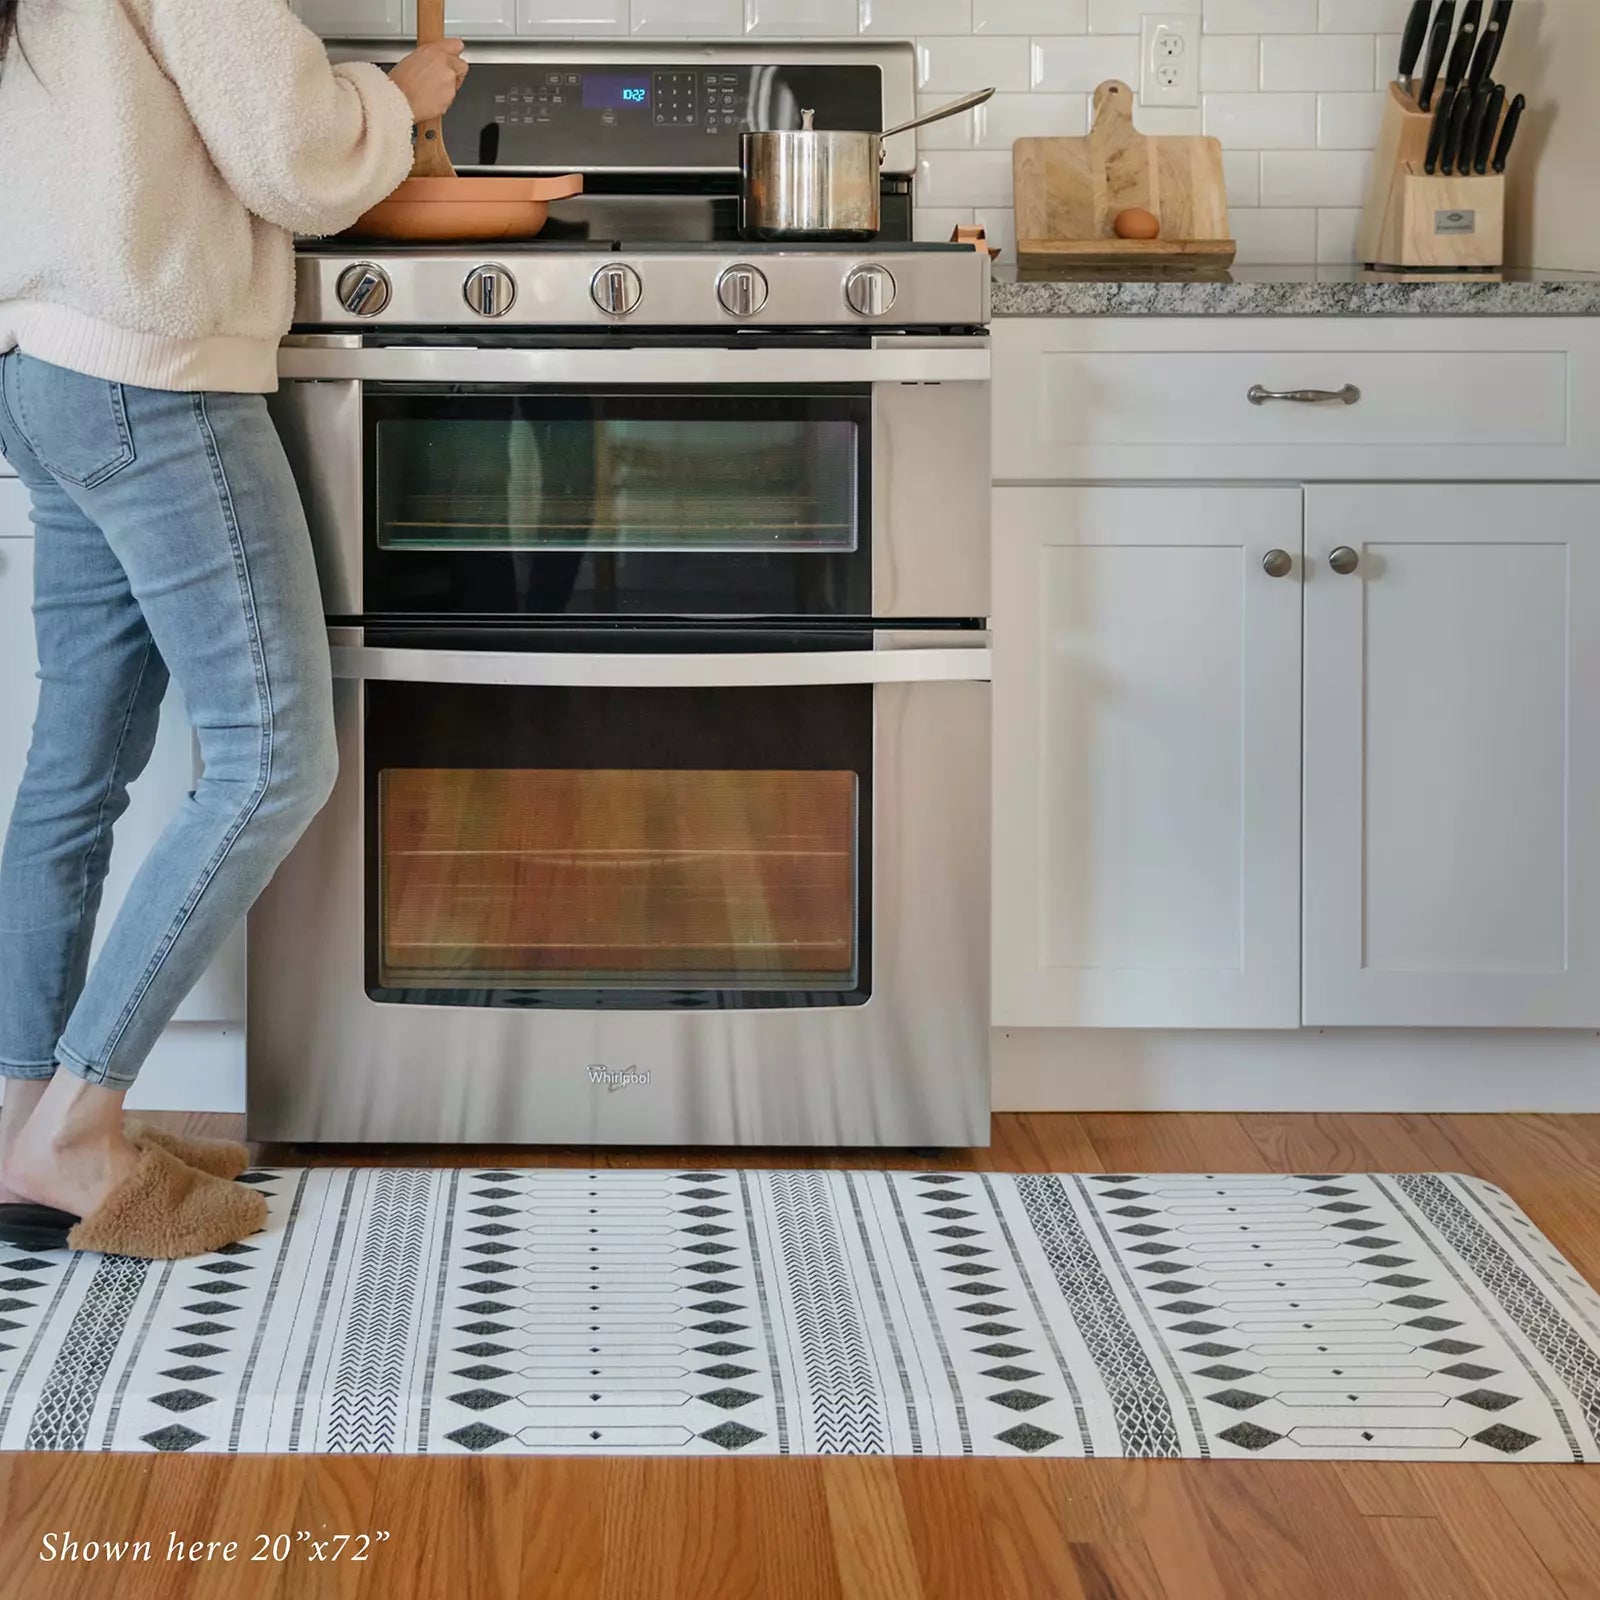 Nordique Slate Black and White Boho Nordic Print Standing Mat in kitchen with woman cooking at stove